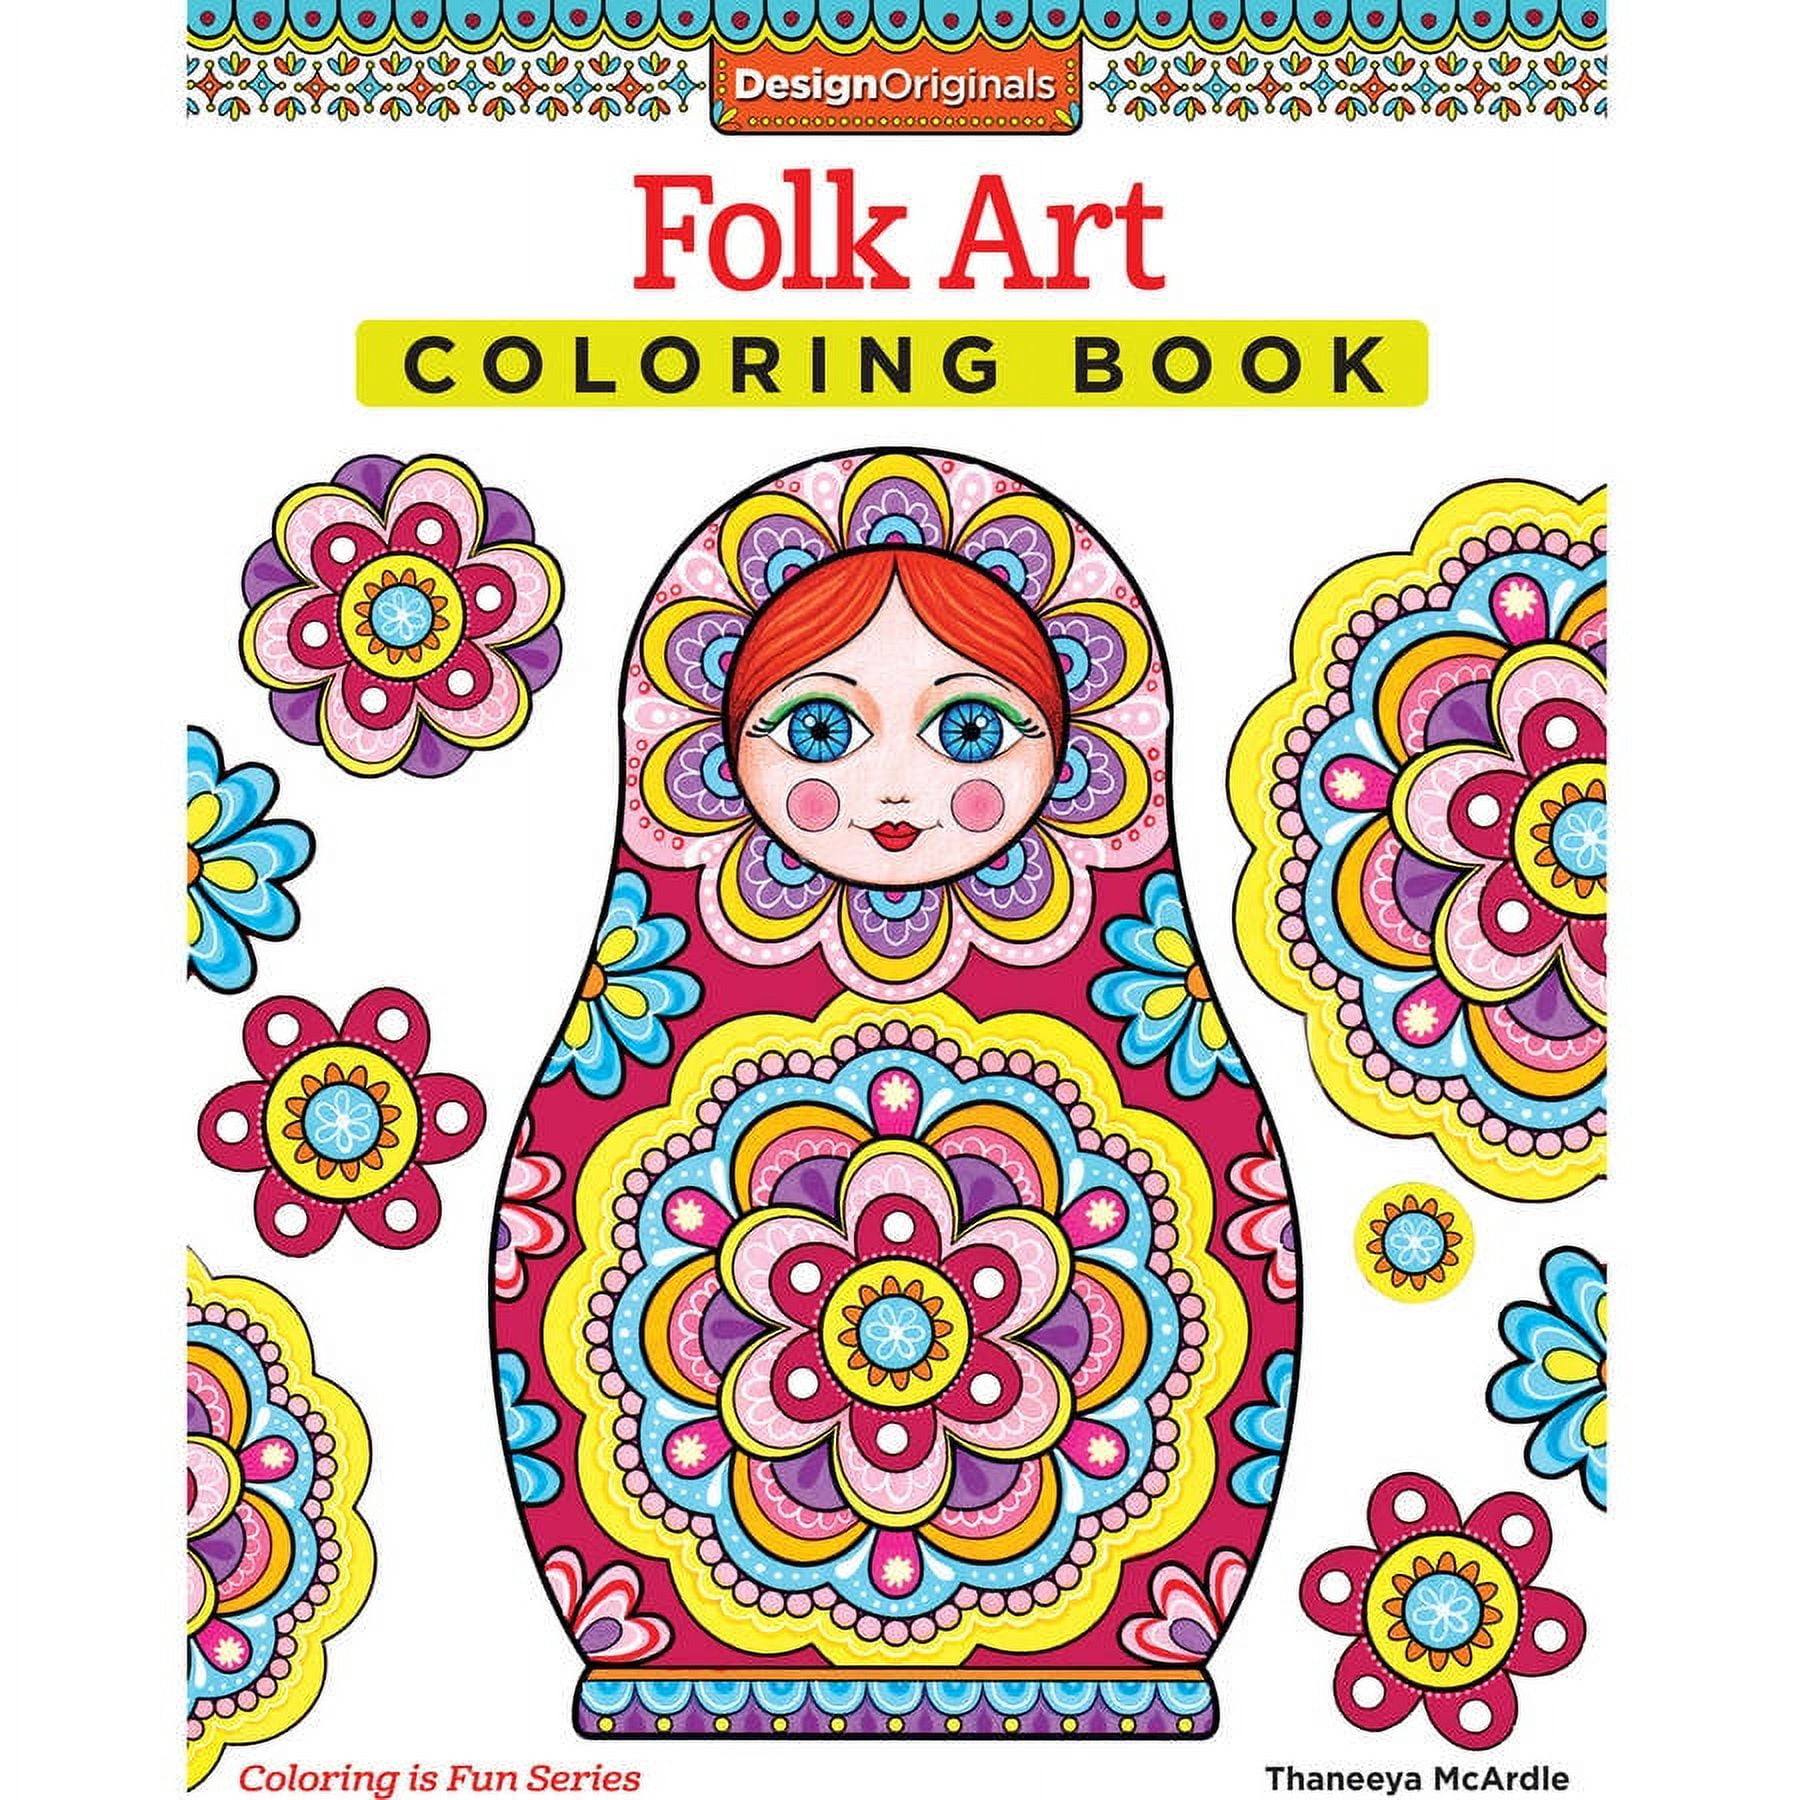 Educational Art Kits for Kids. Introductory Watercolor Folk 